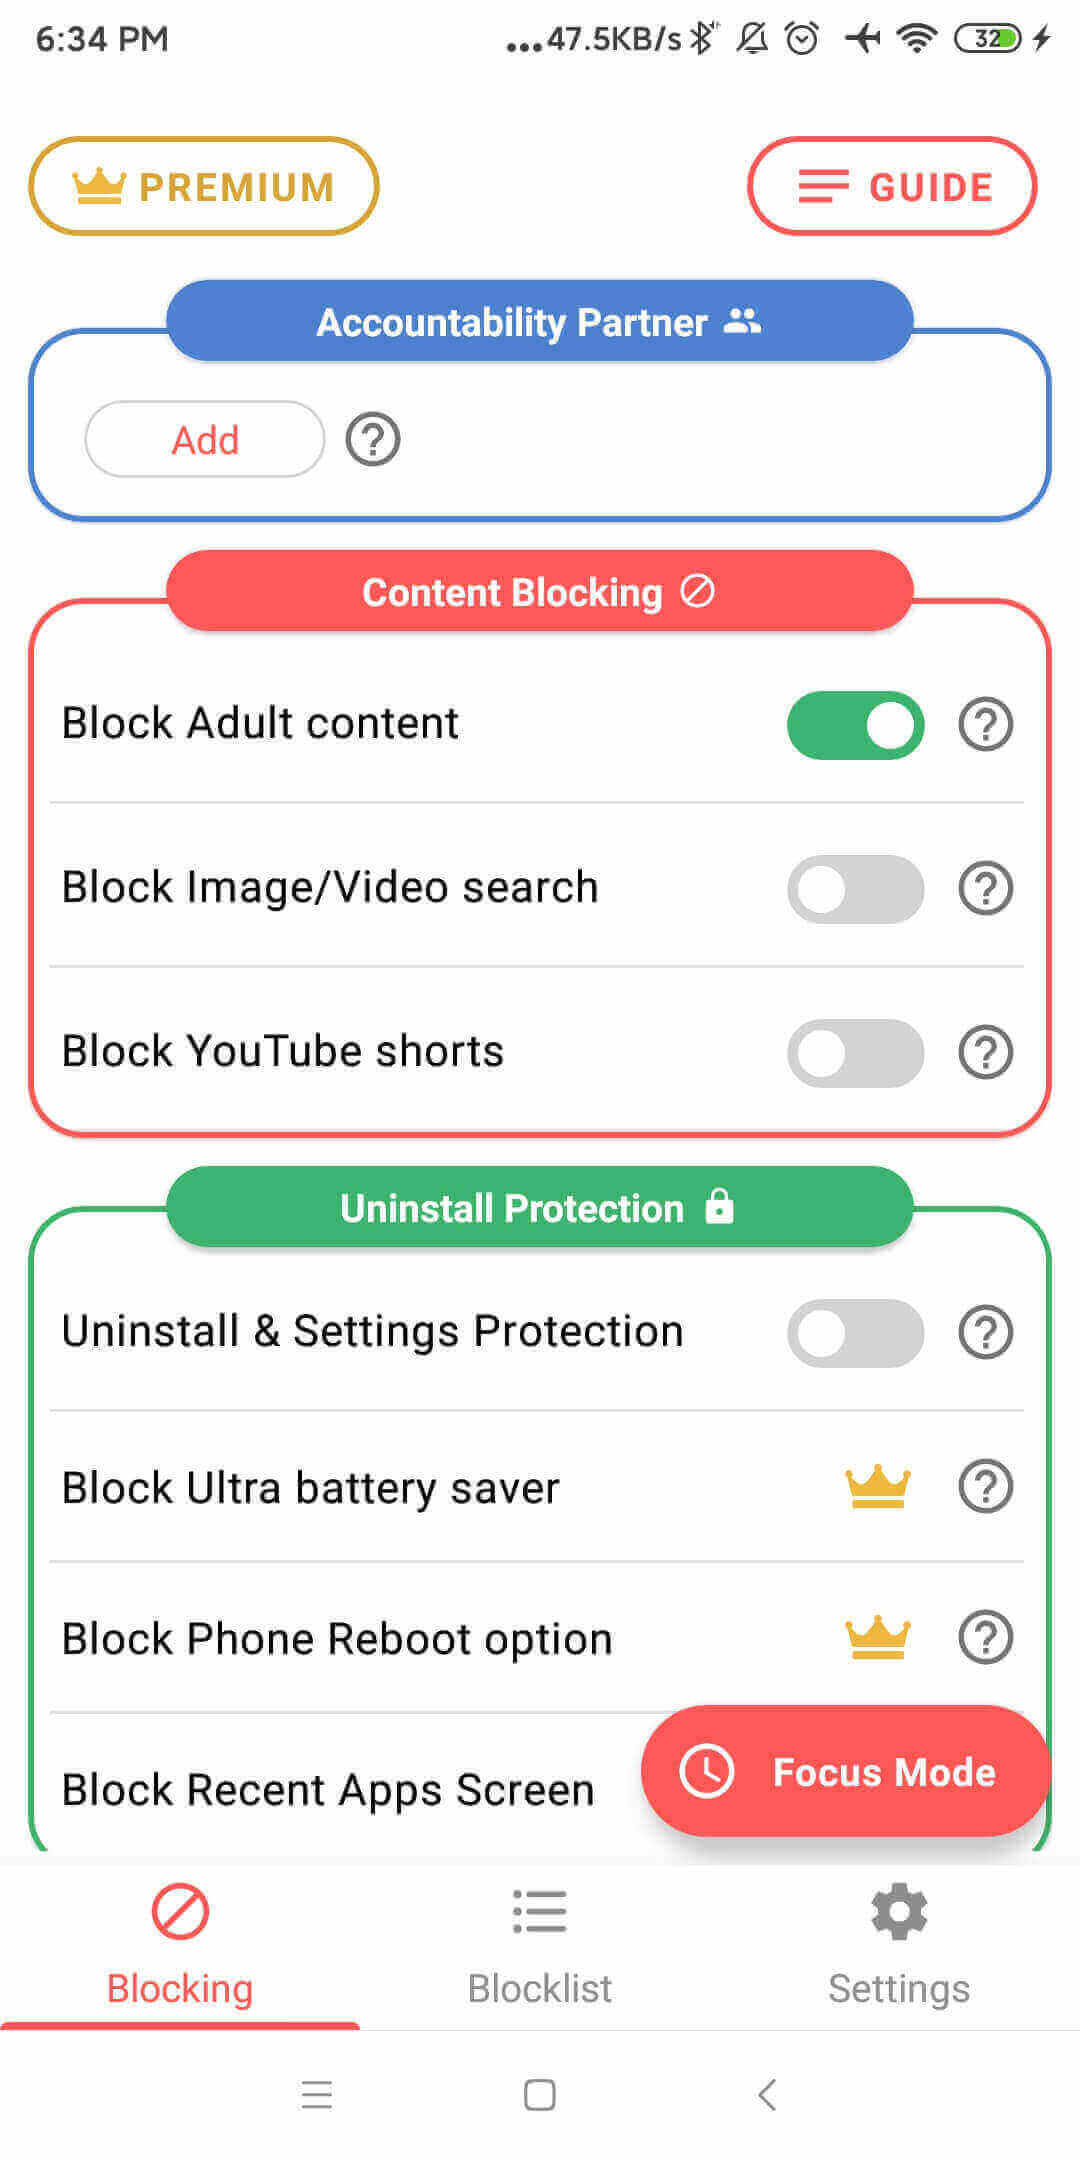 taping Blocking at the bottom of the screen bringing up Add Accountability Partner, Block Adult content, and more options